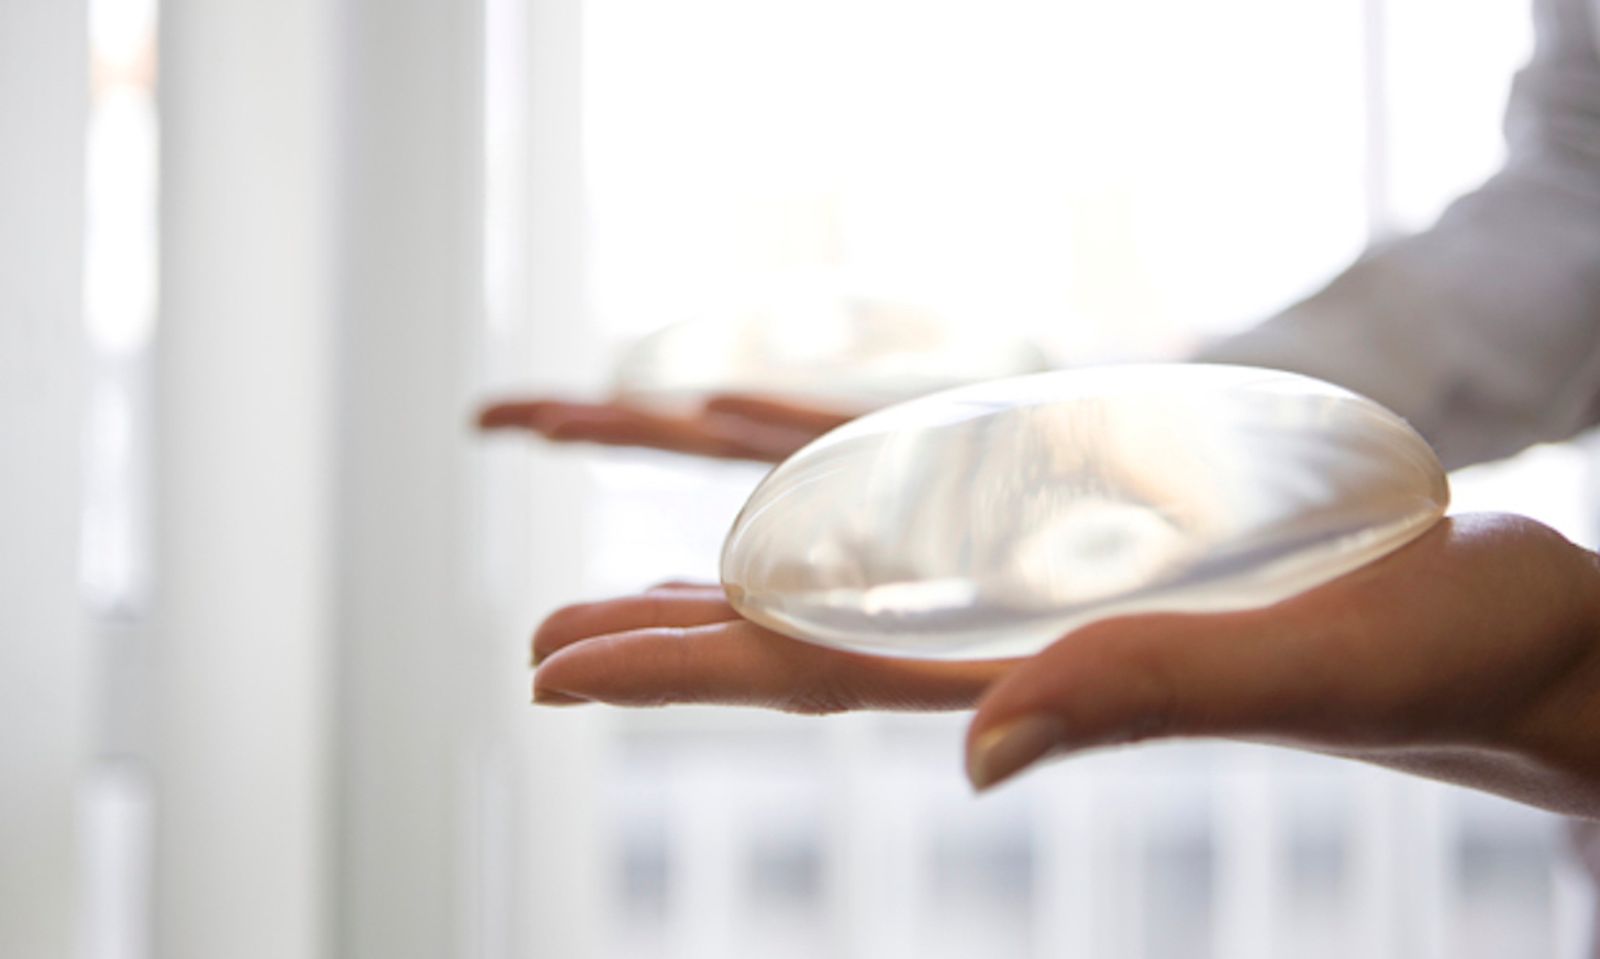 Cancer-Linked Textured Breast Implants Will Not Be Banned In U.S.